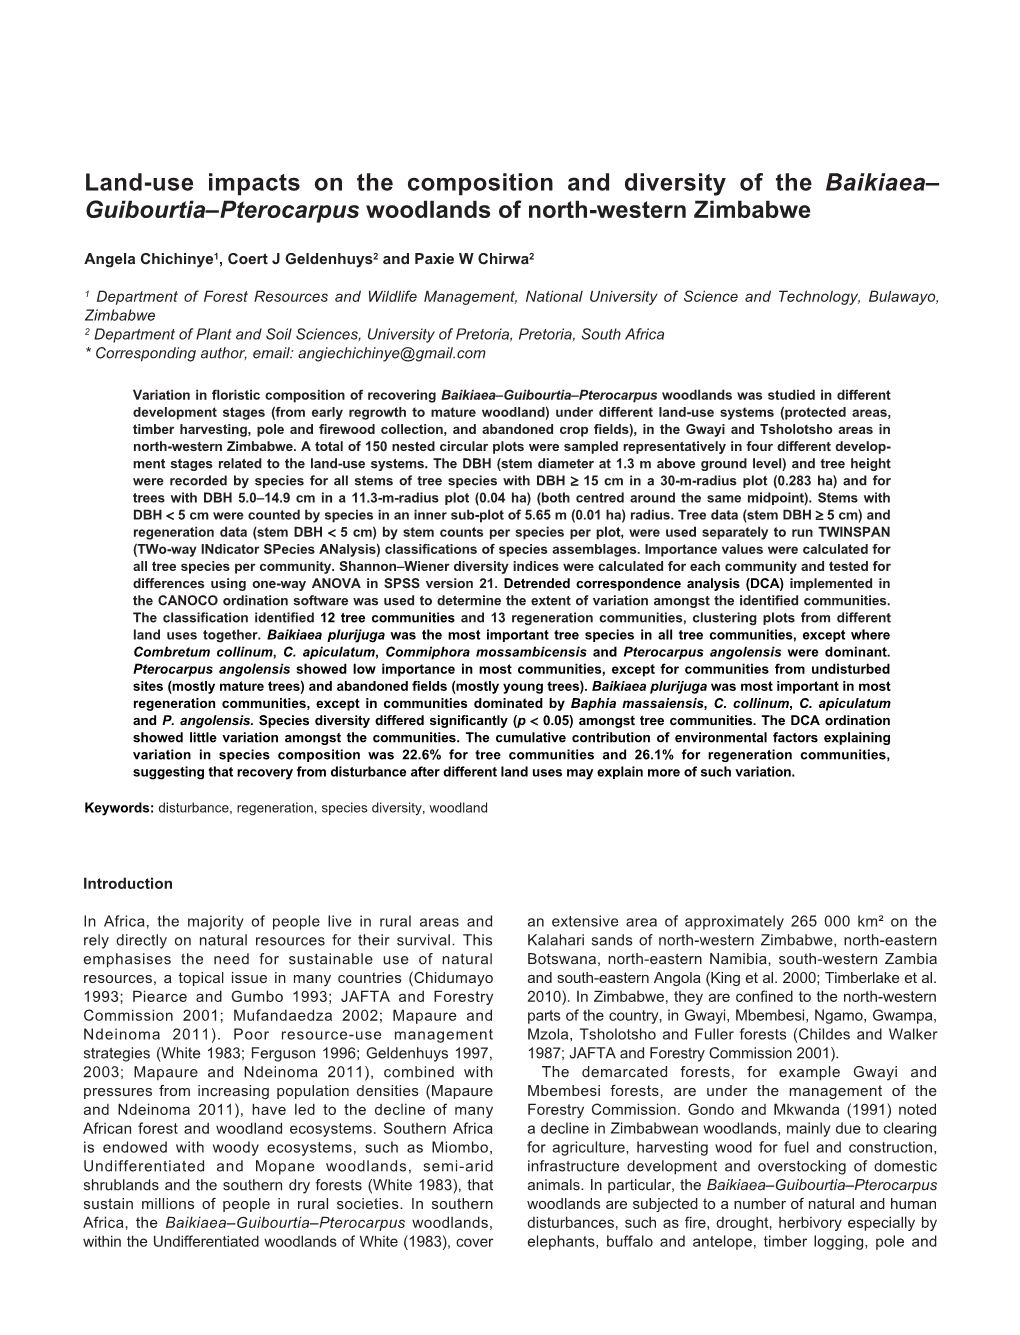 Land-Use Impacts on the Composition and Diversity of the Baikiaea– Guibourtia–Pterocarpus Woodlands of North-Western Zimbabwe